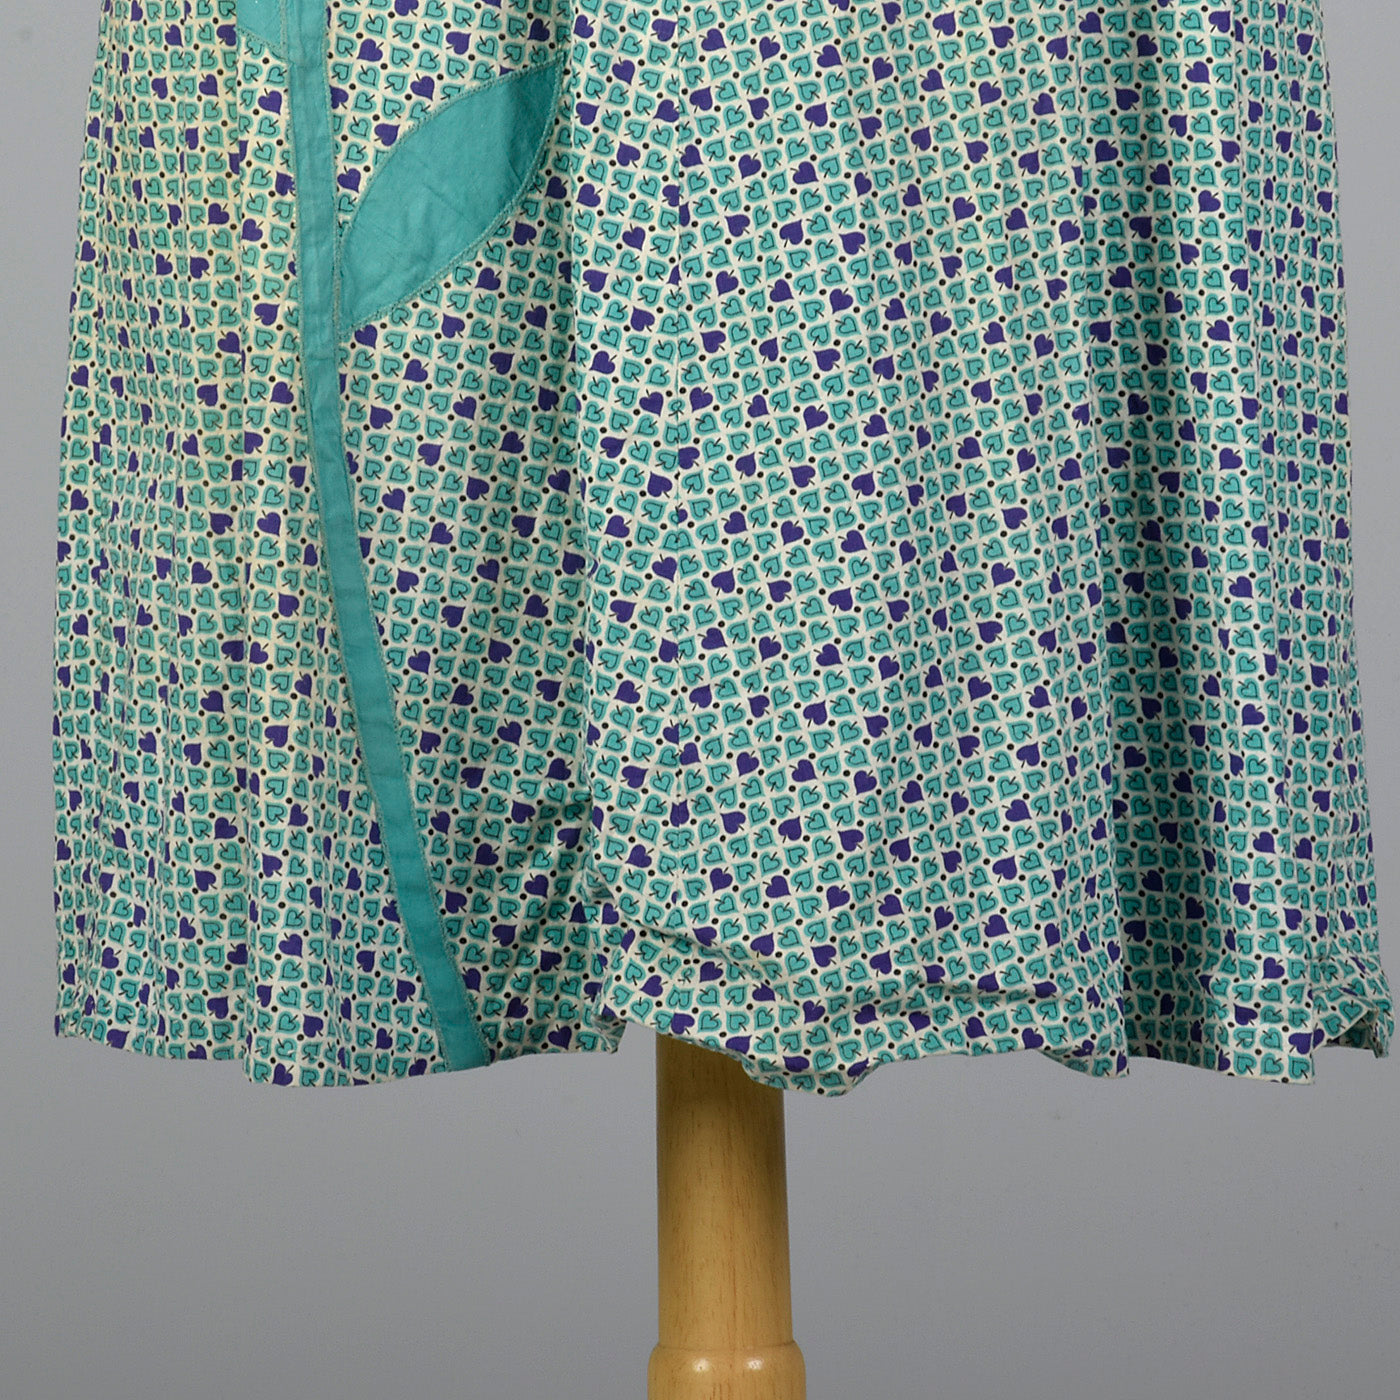 1950s Cotton Day Dress with Novelty Flower Pocket